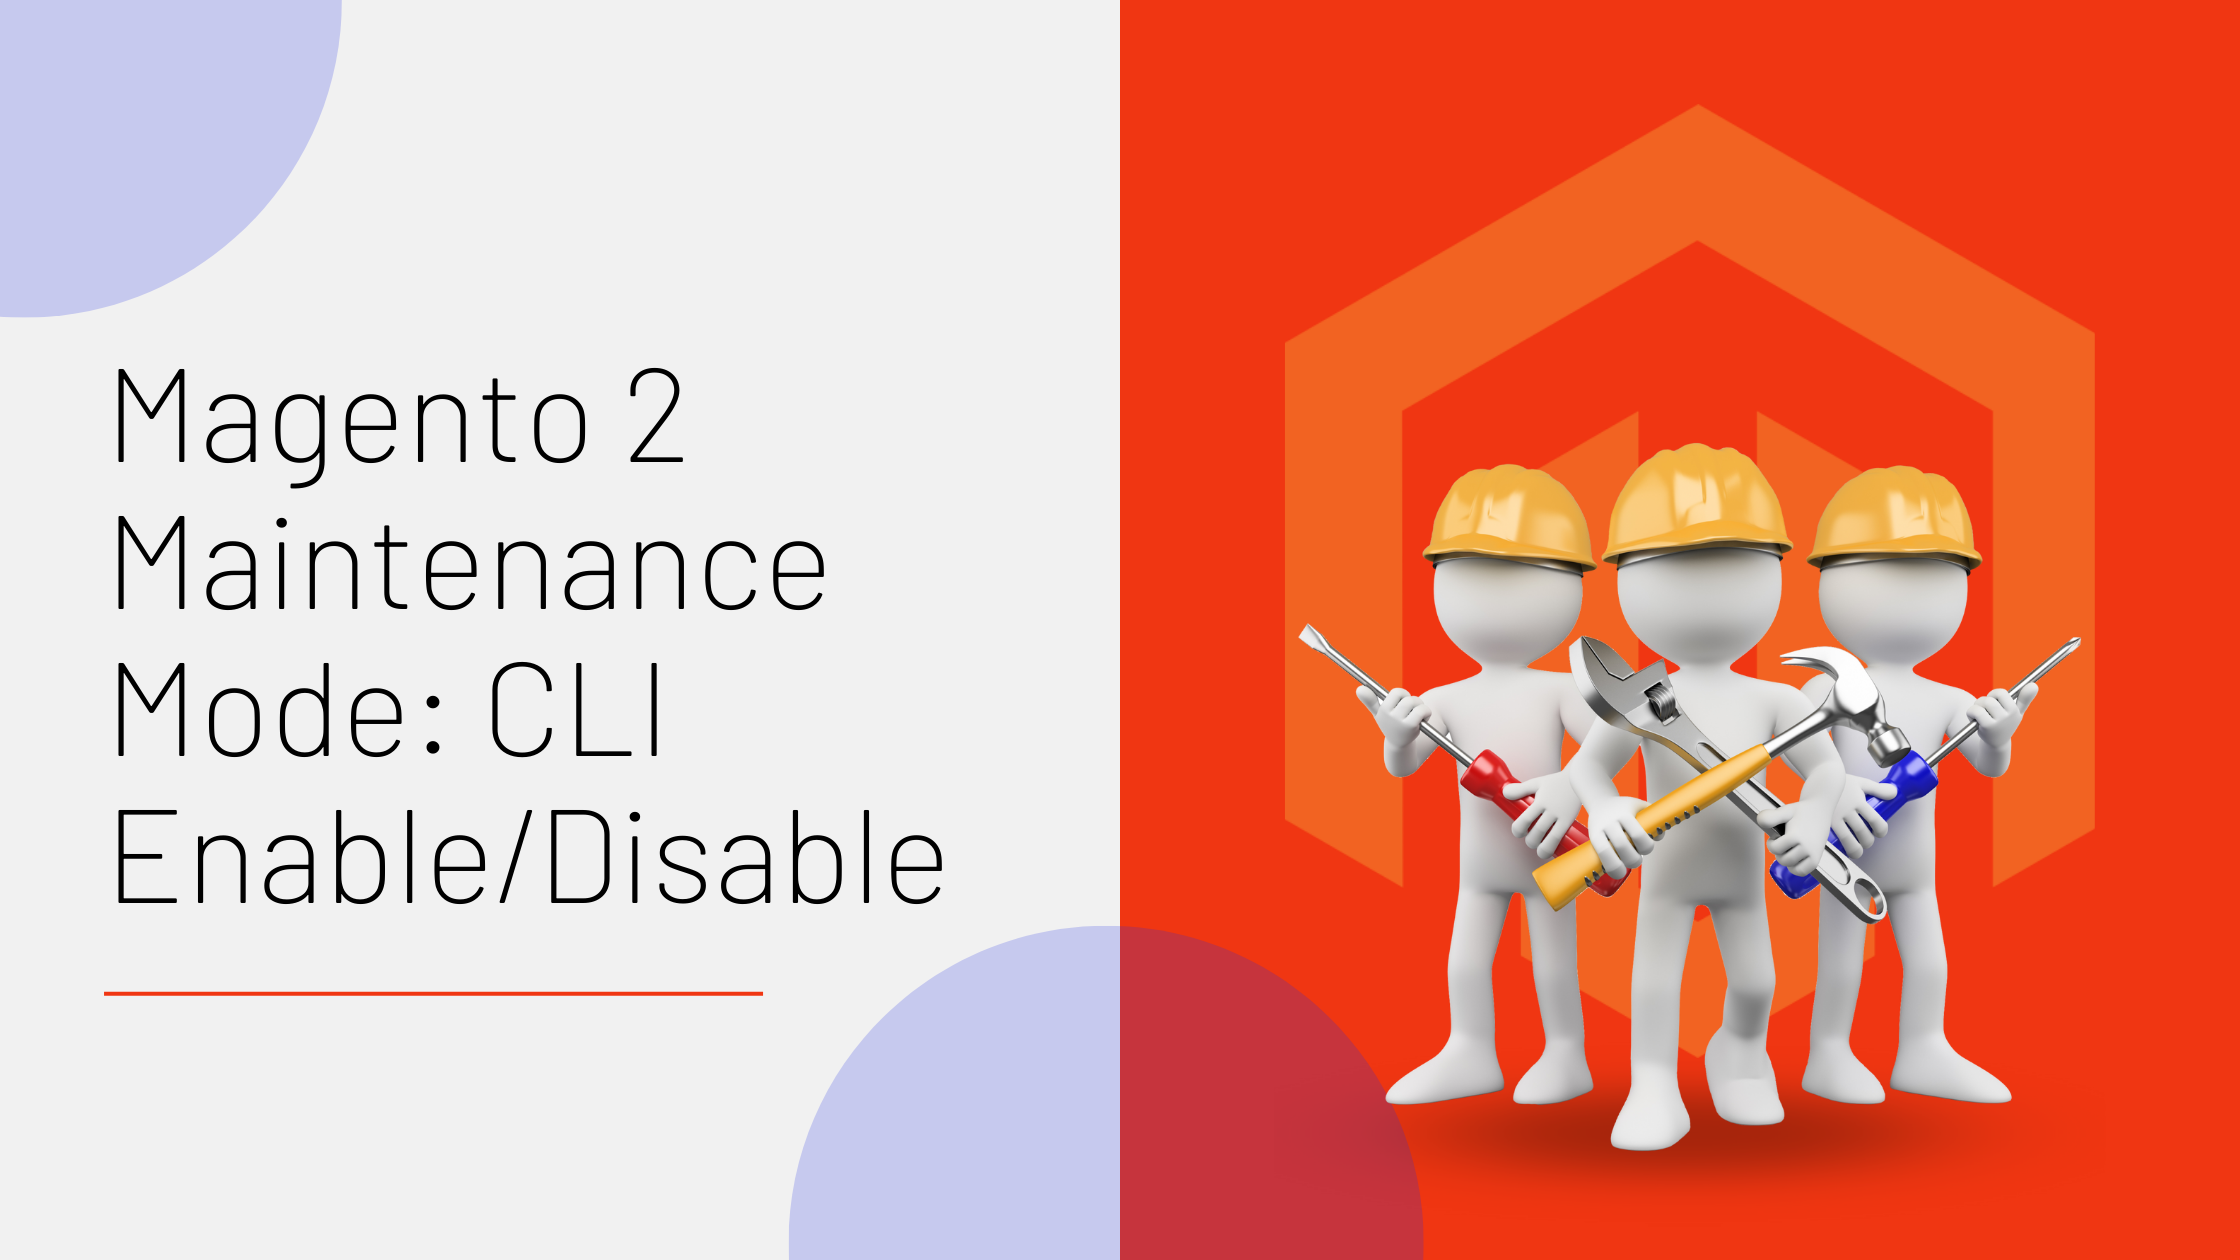 Enable or Disable Magento 2 Maintenance Mode via Command Line